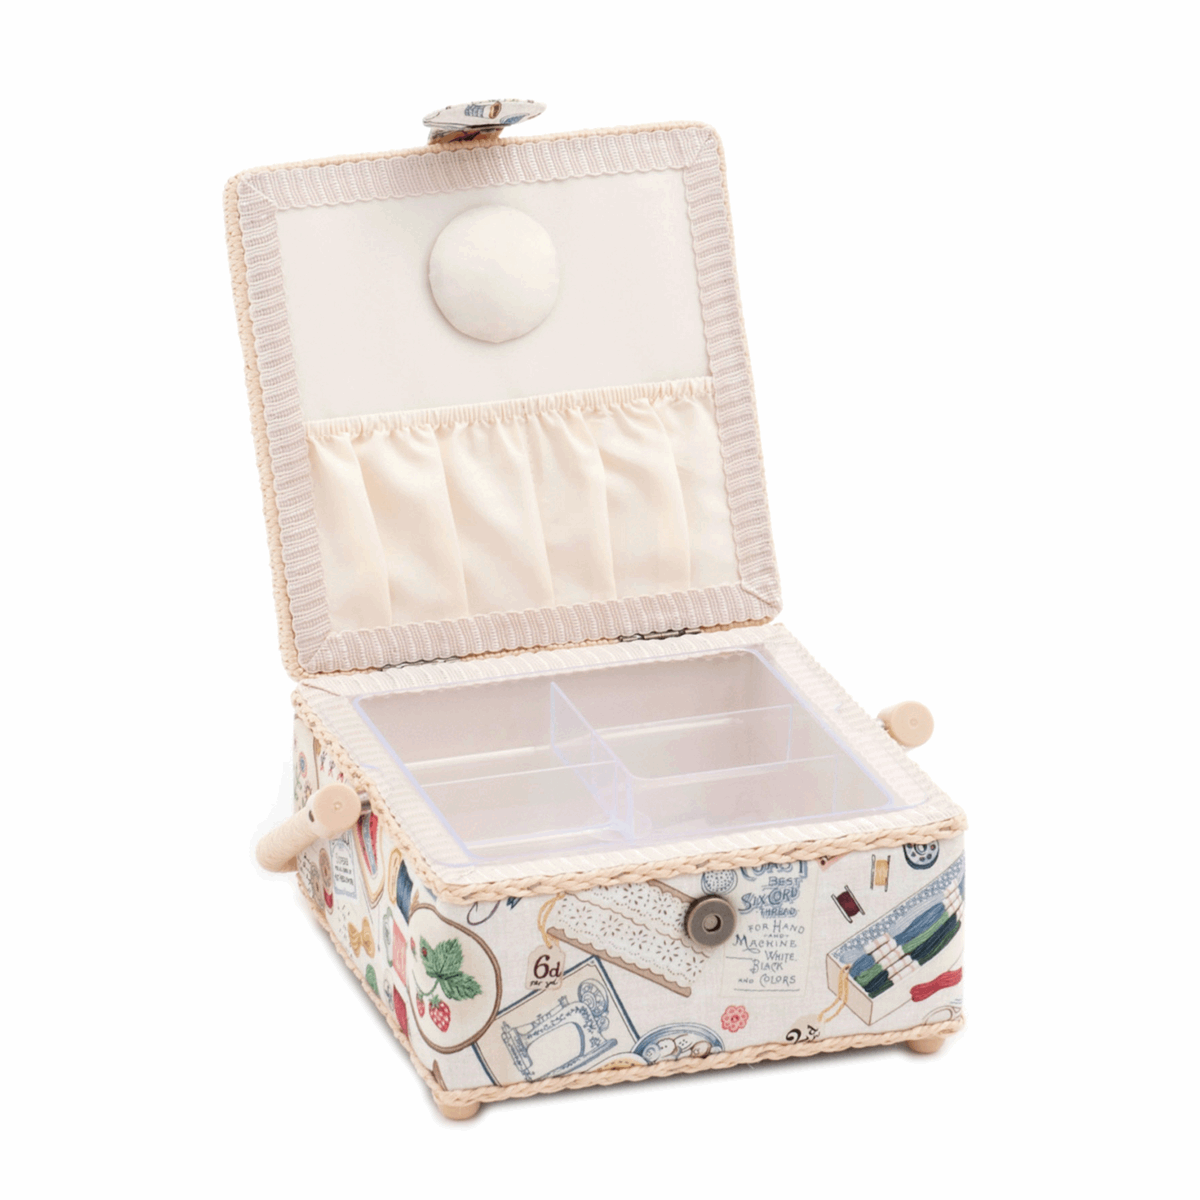 Sewing Notions Sewing Box - Small Square